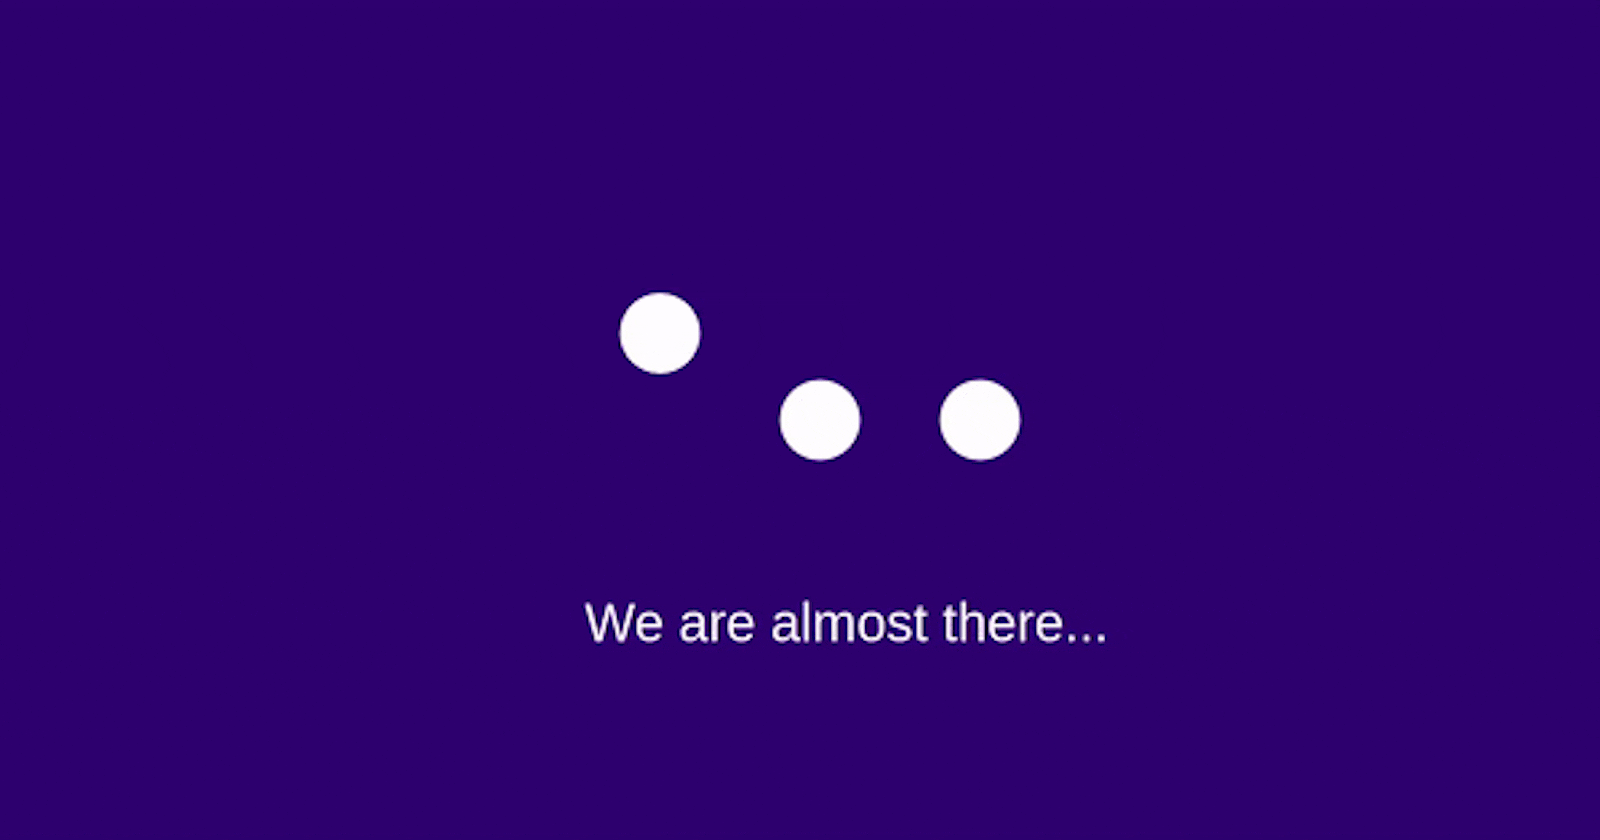 Three Dots Jumping Loading Status Animation using CSS Only